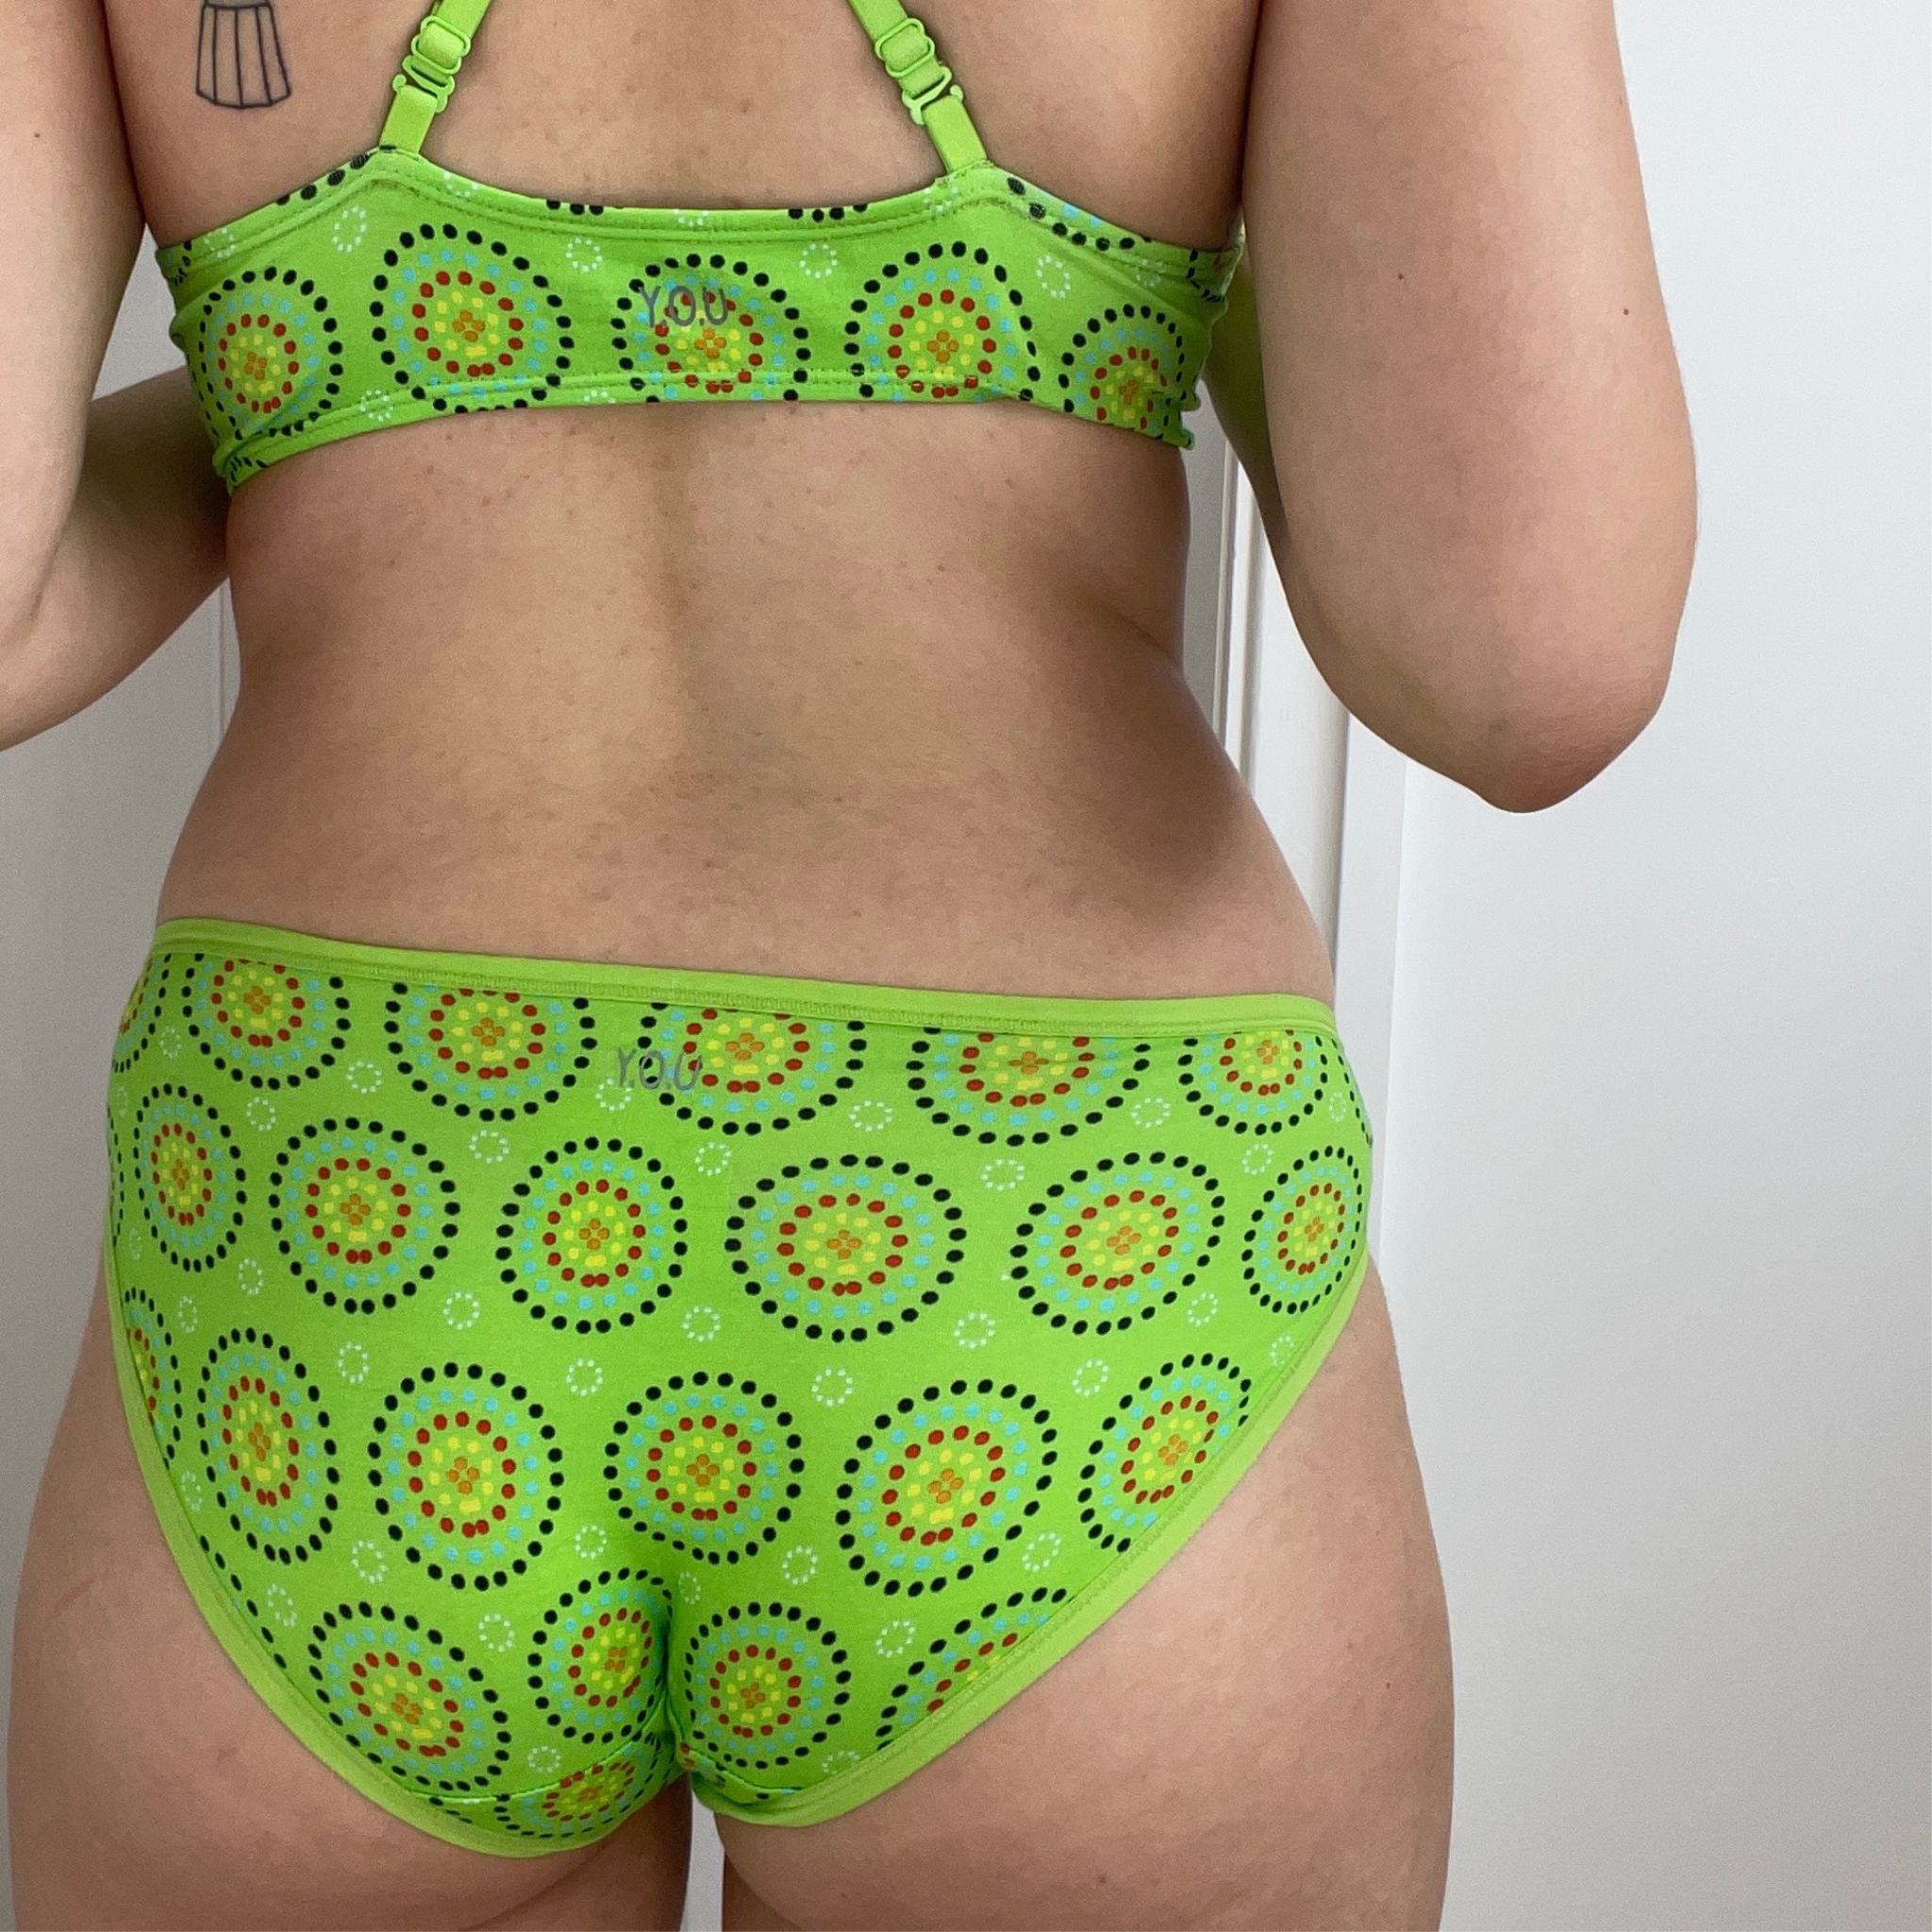 Person wearing green bikini bottoms and bralette with circular patterns, standing indoors